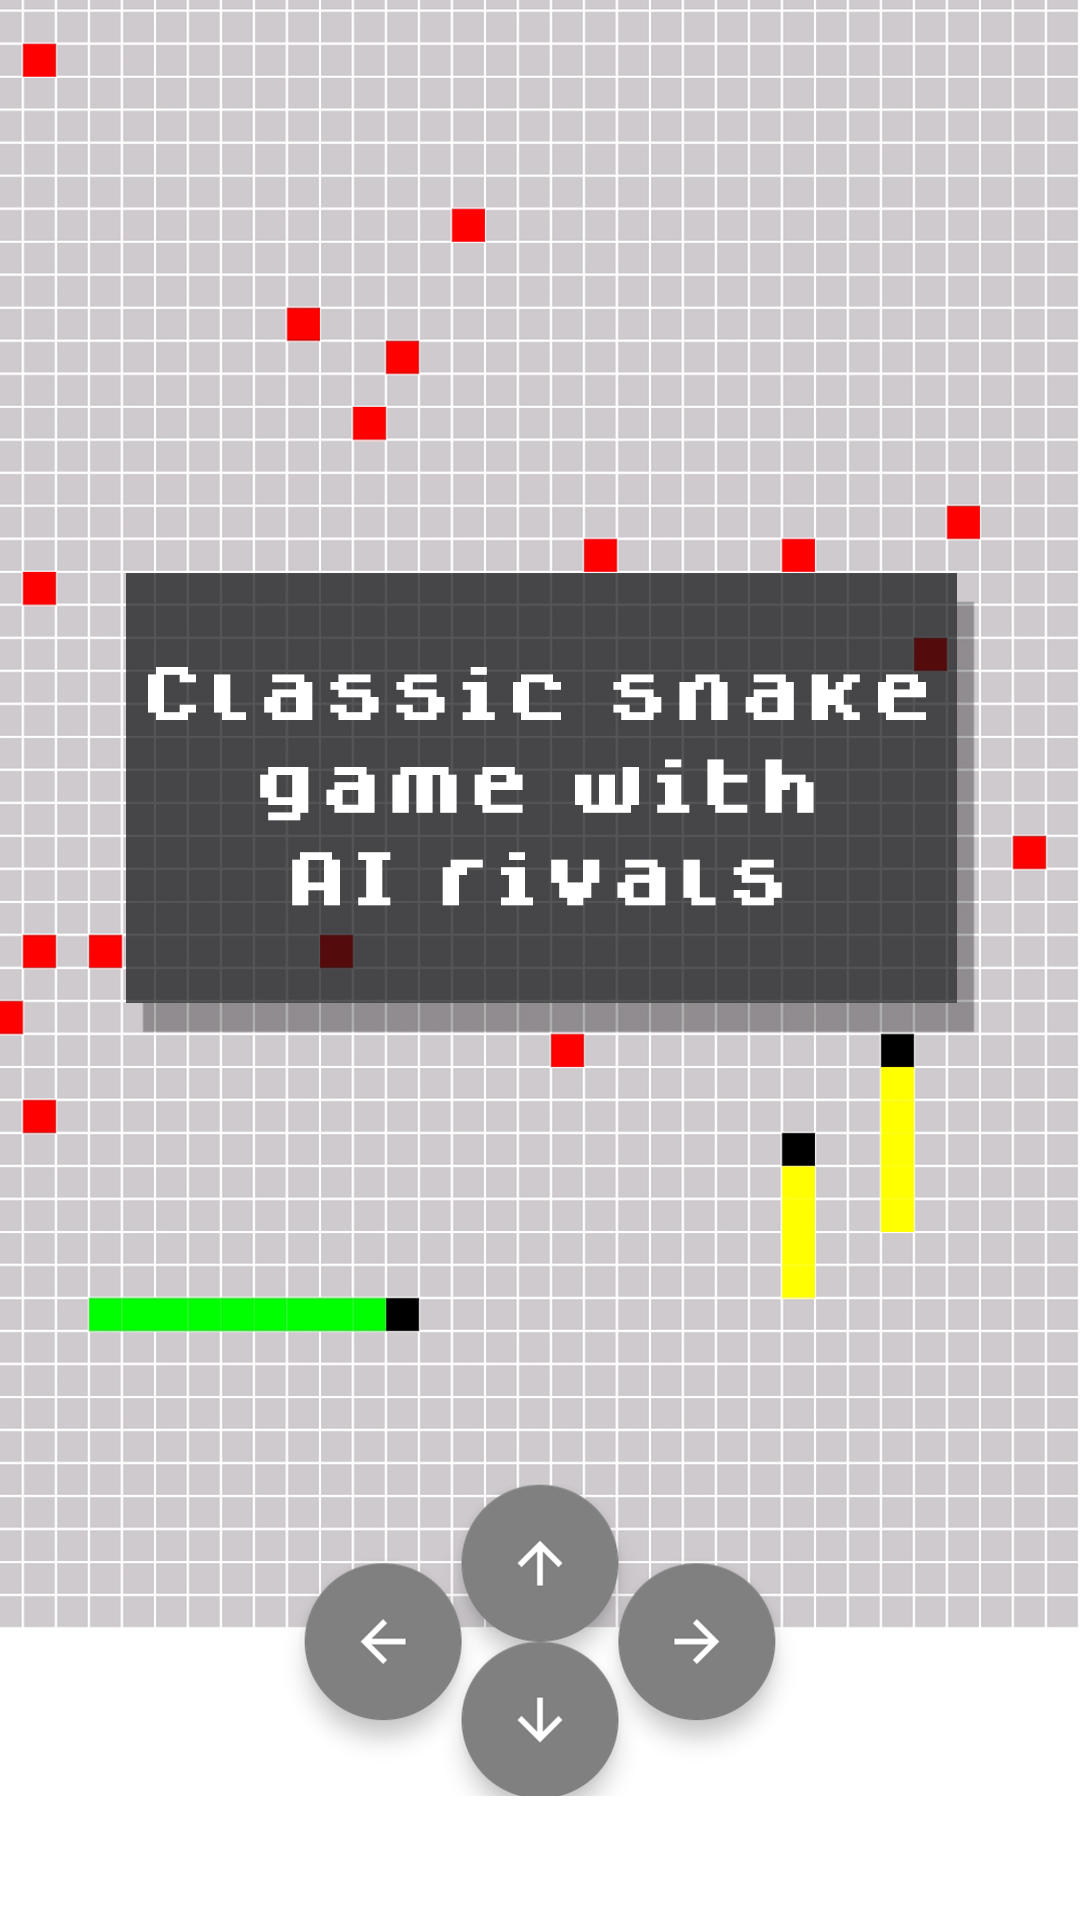 Snake Classic - The Snake Game APK for Android - Download